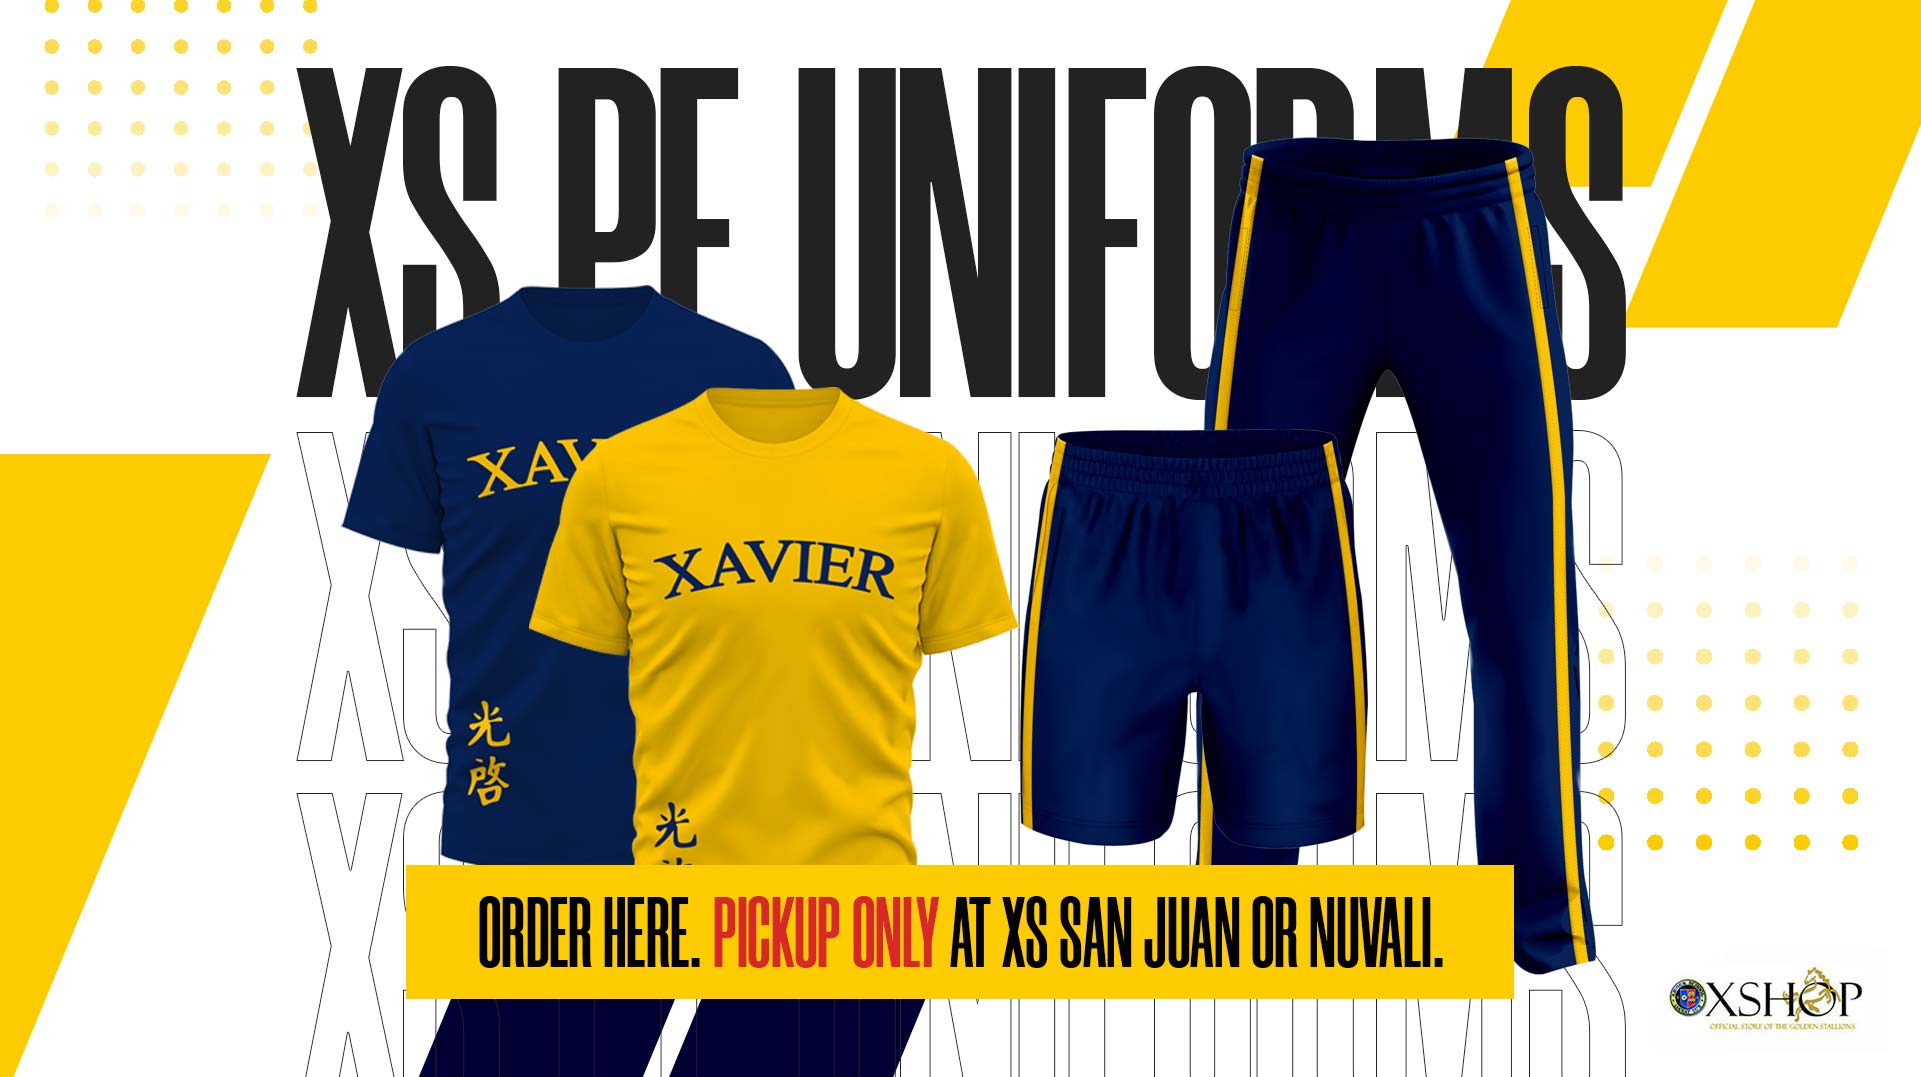 XAVIER PE UNIFORMS NOW AVAILABLE